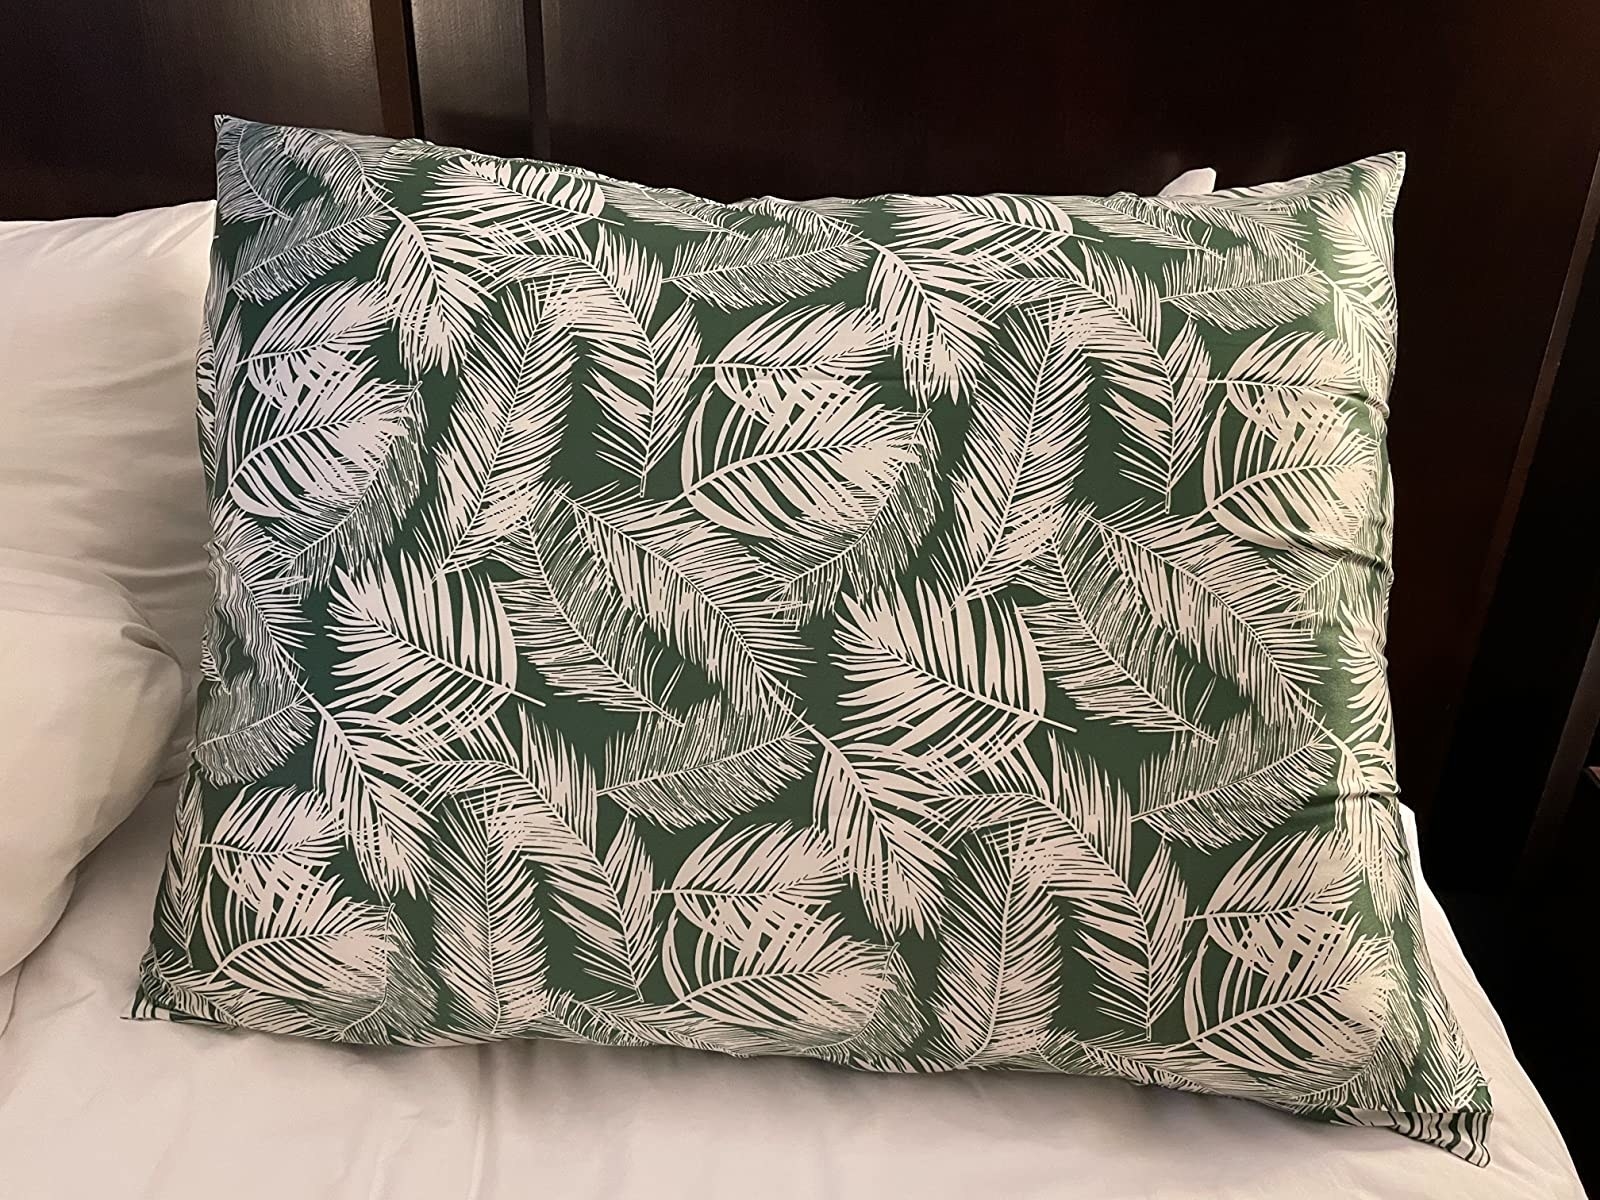 Reviewer image of palm leaf print pillow